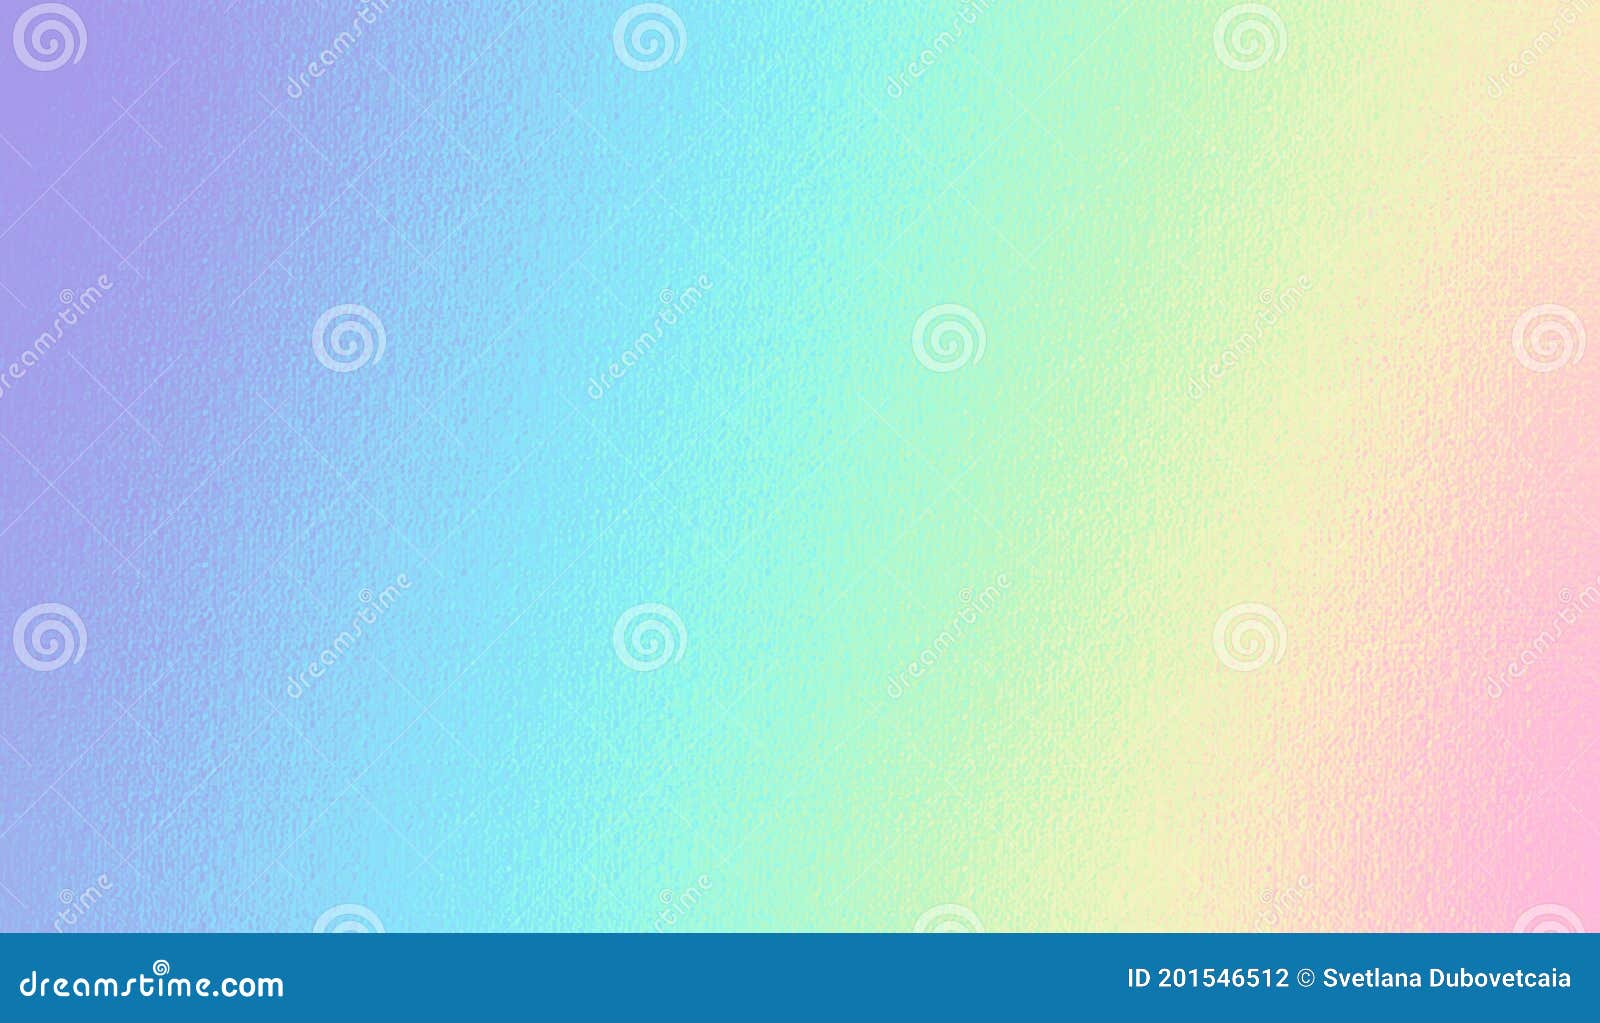 iridescent, background. pastel color gradient effect foil. rainbow texture. neon colors. metallic background. sparkly metall. soft